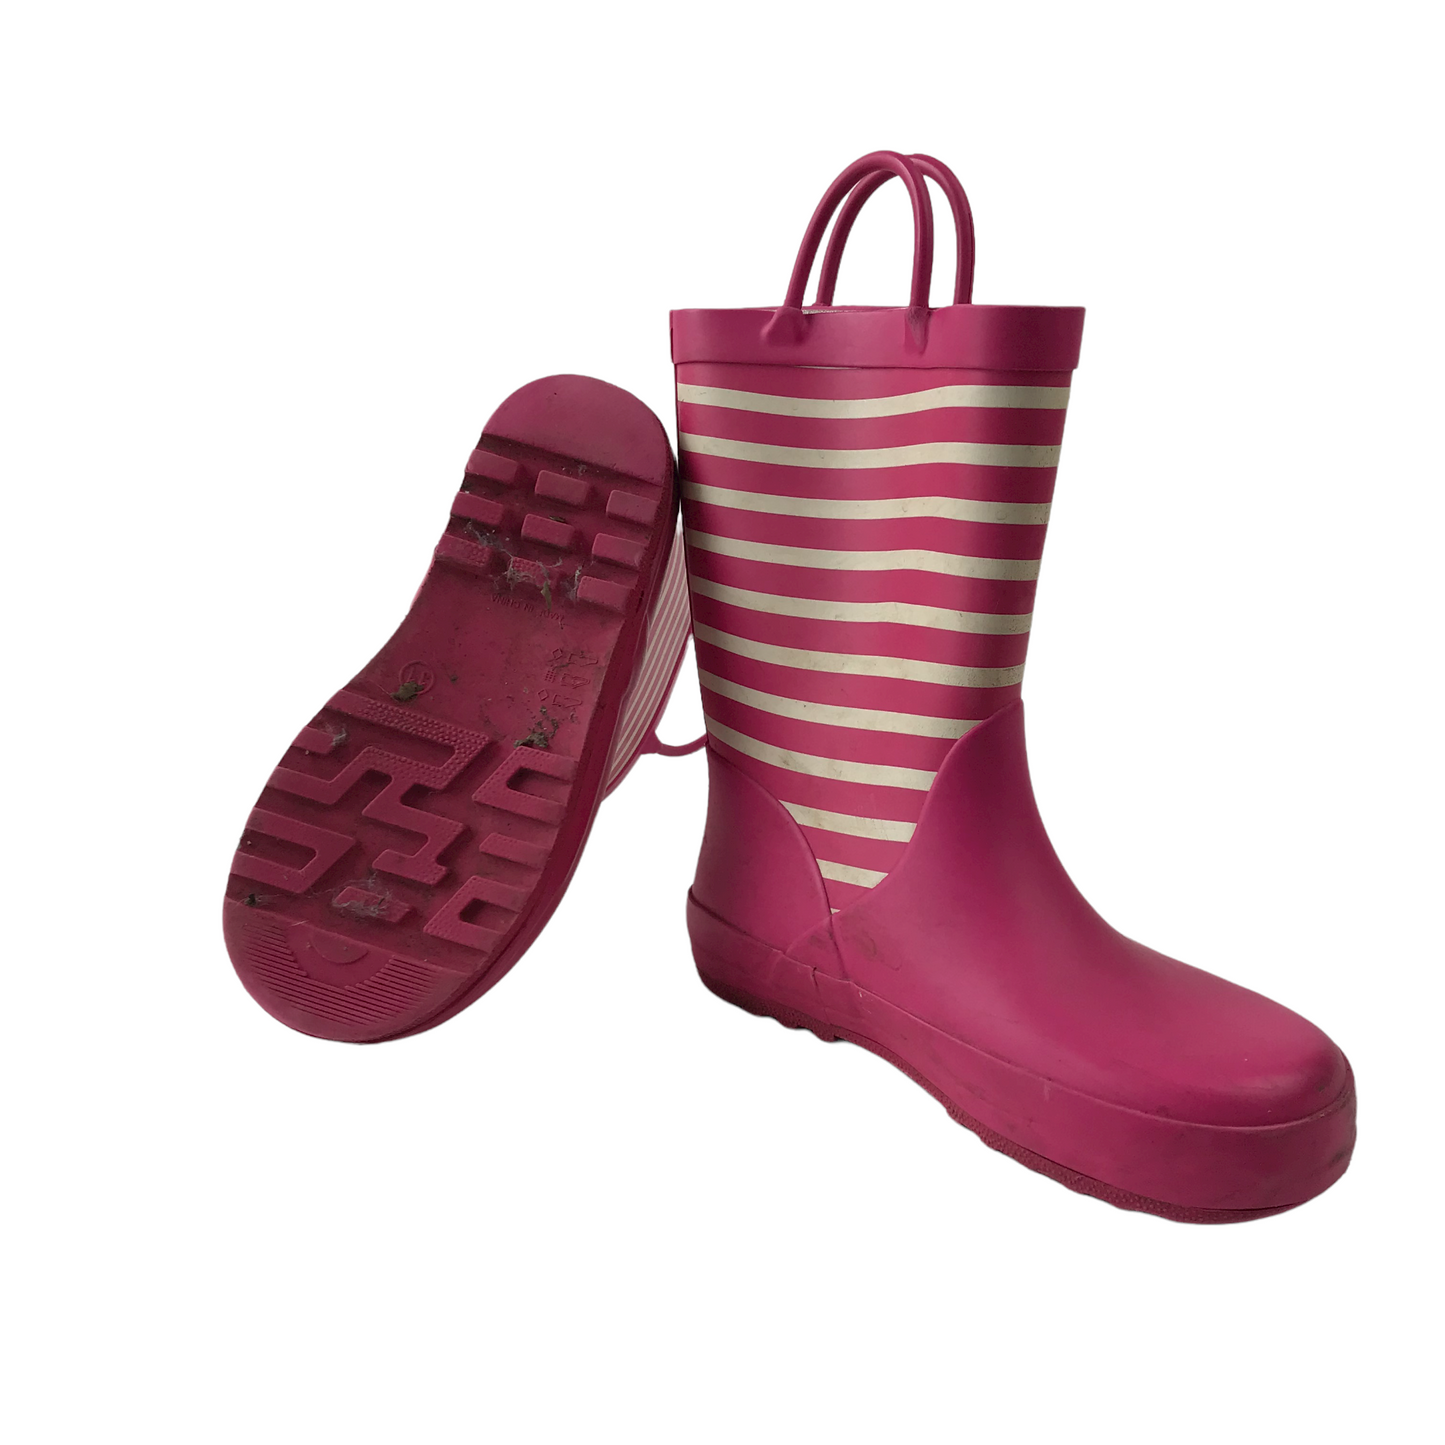 M&S Pink and White Stripy Wellies Shoe Size 11 (jr)